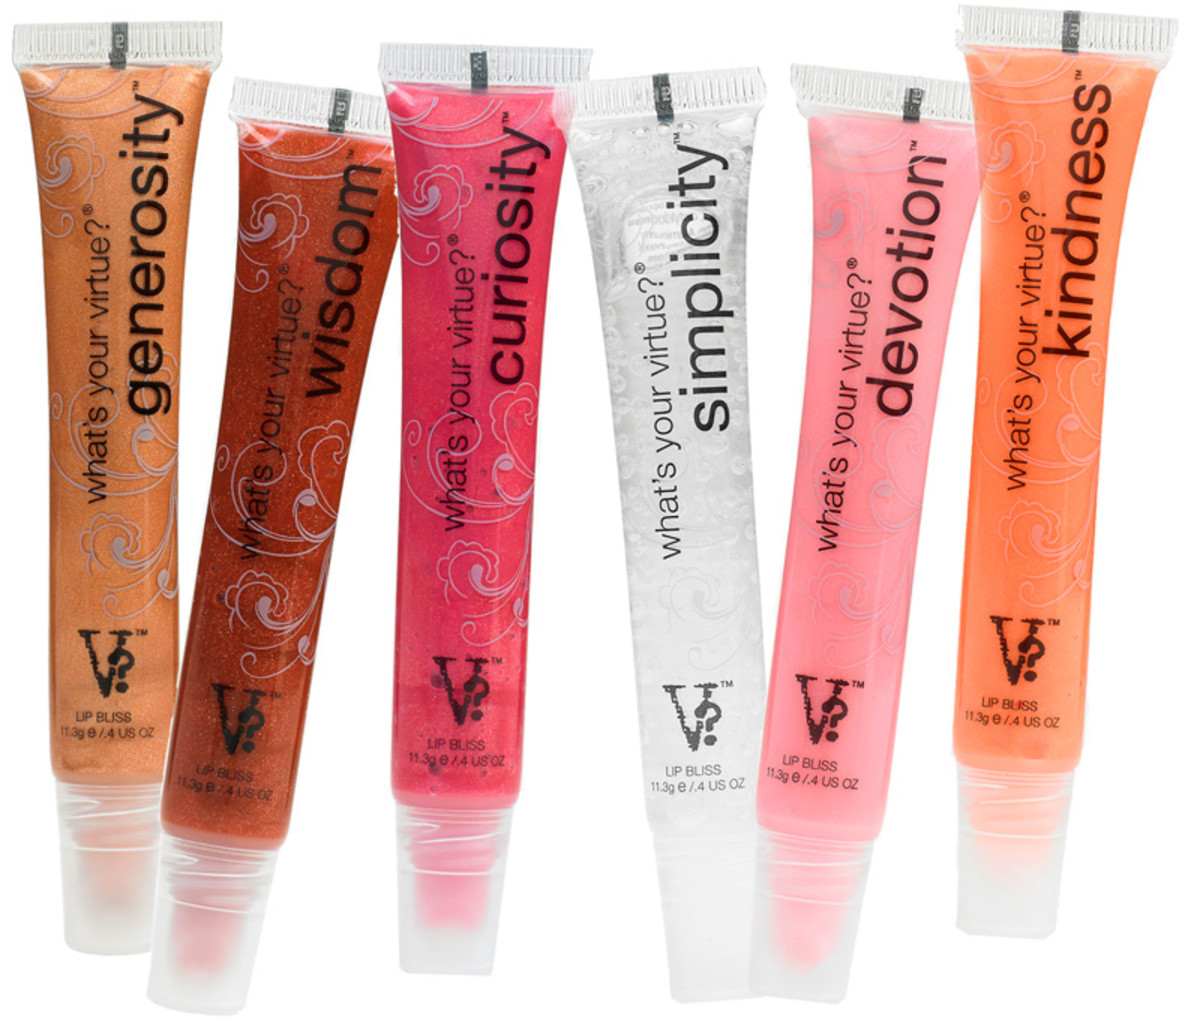 What's Your Virtue Lip Gloss